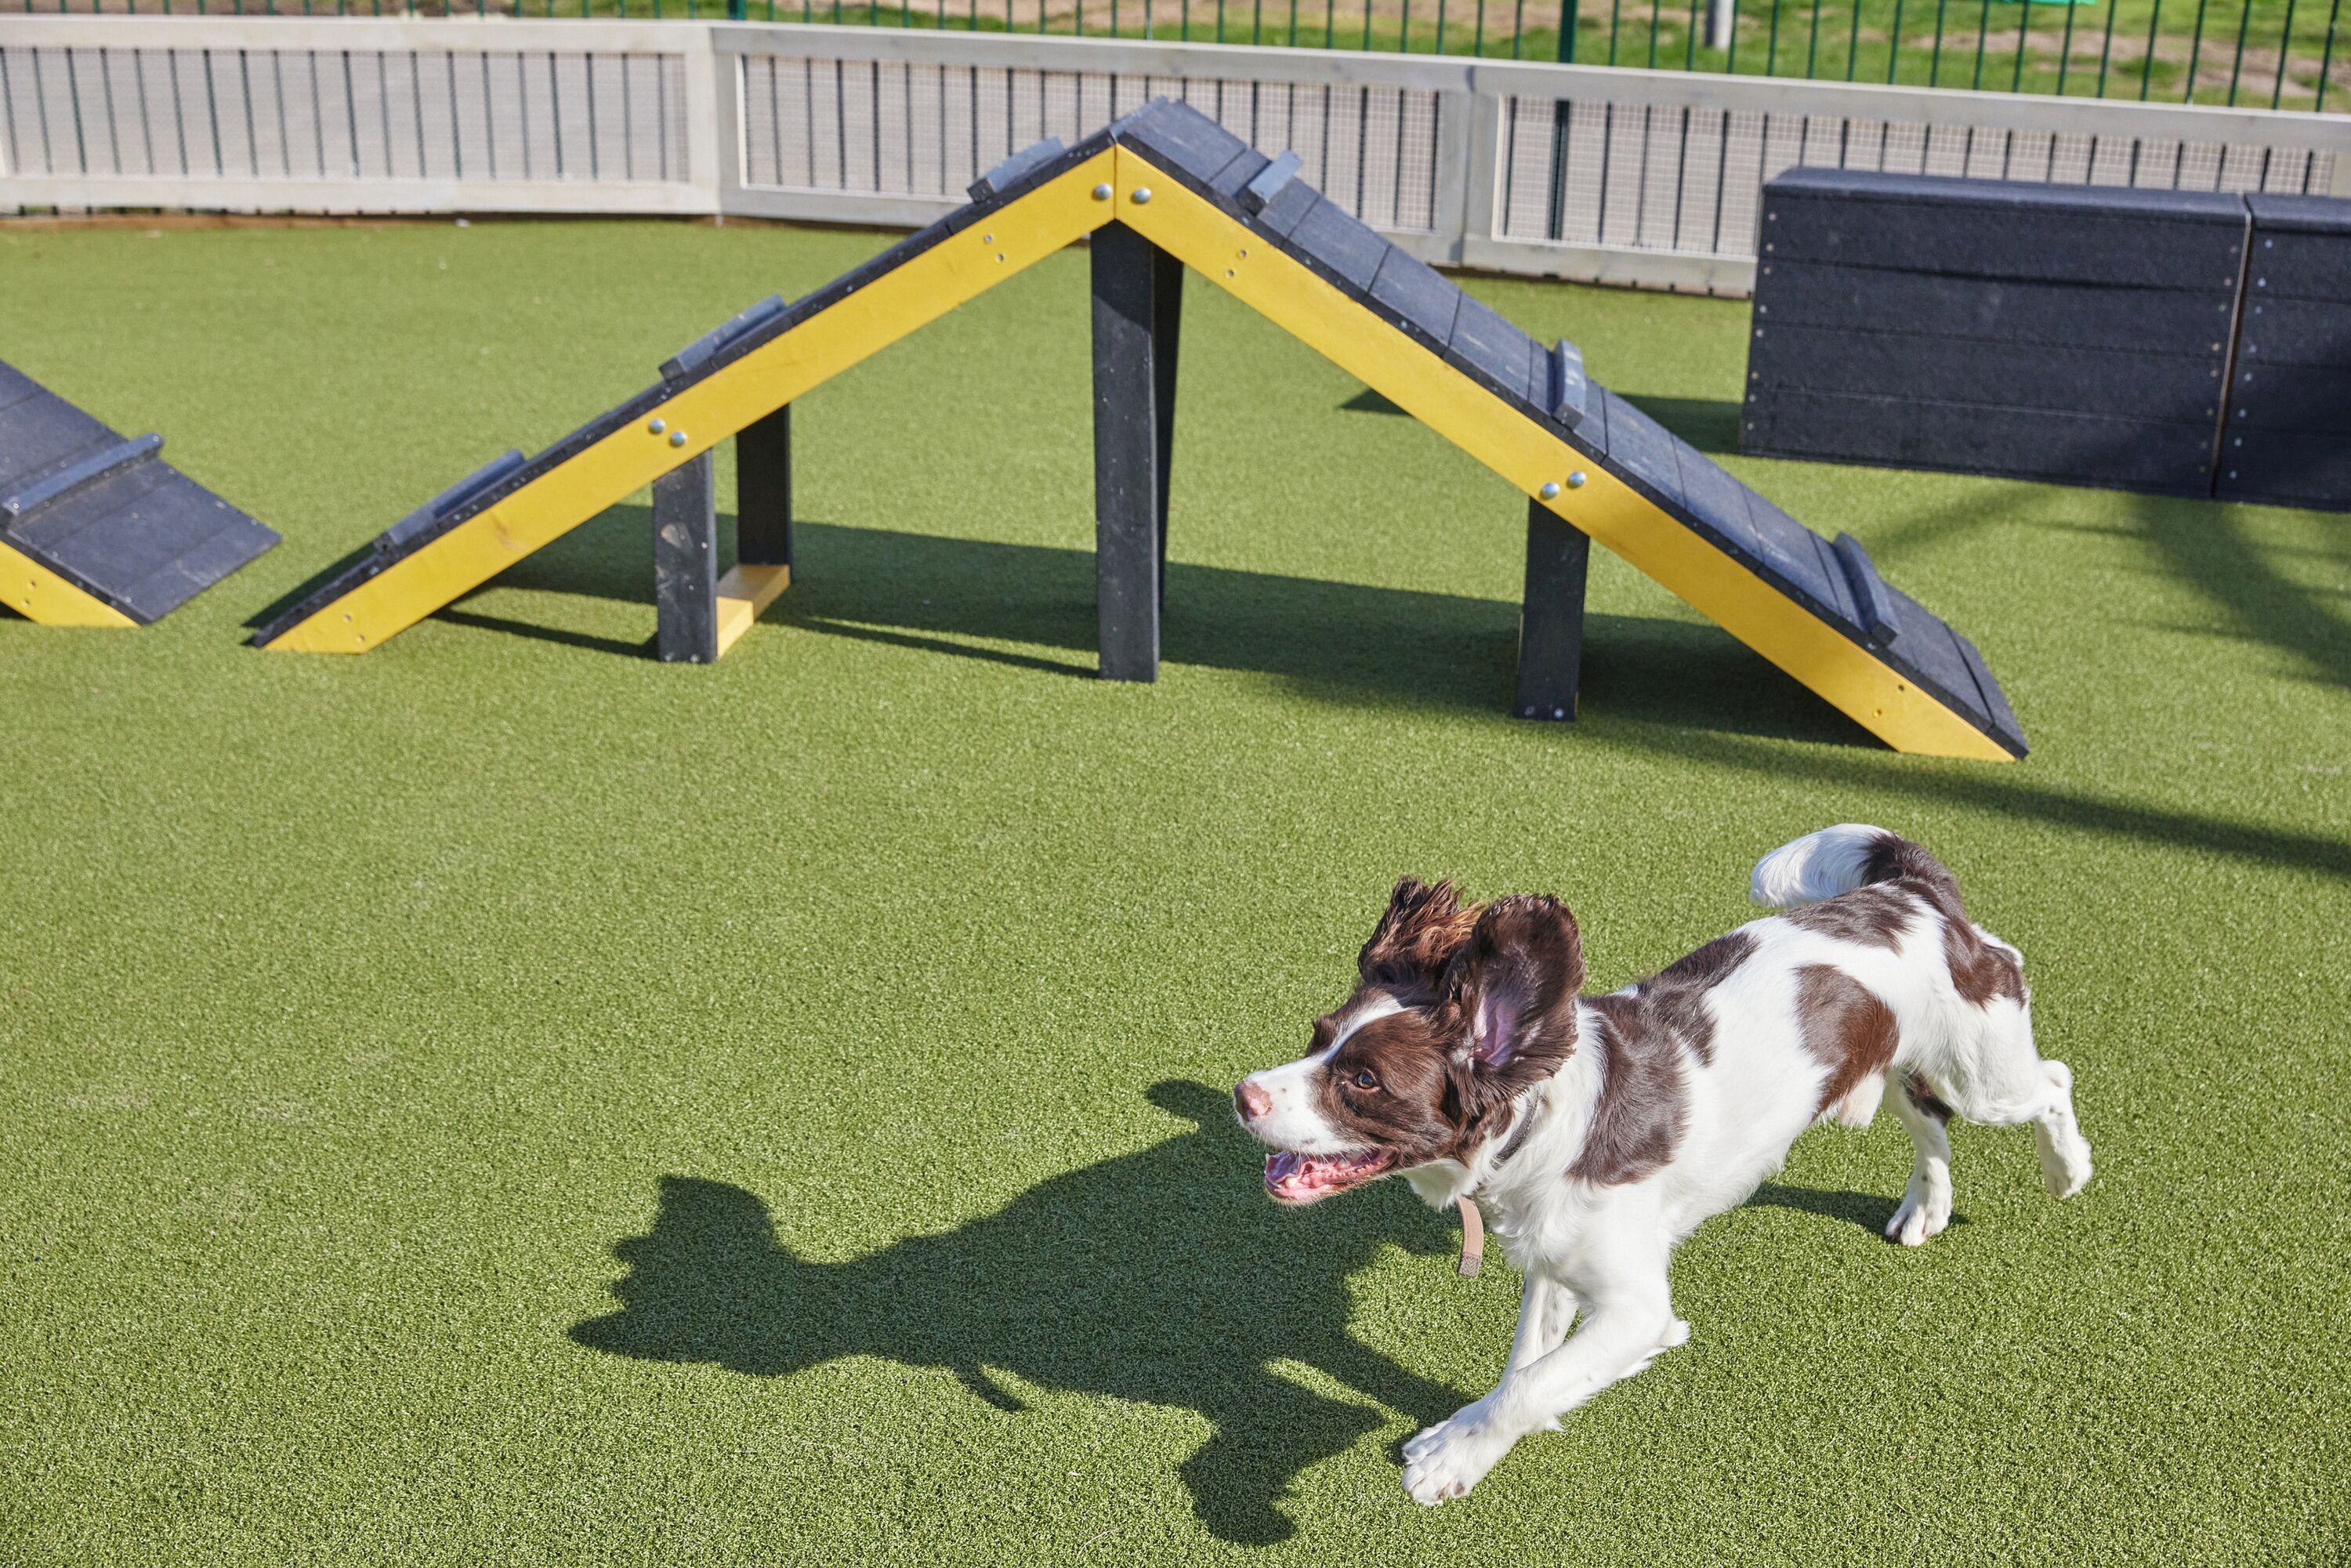 Several have asked to see our DIY dog obstacle course so here it